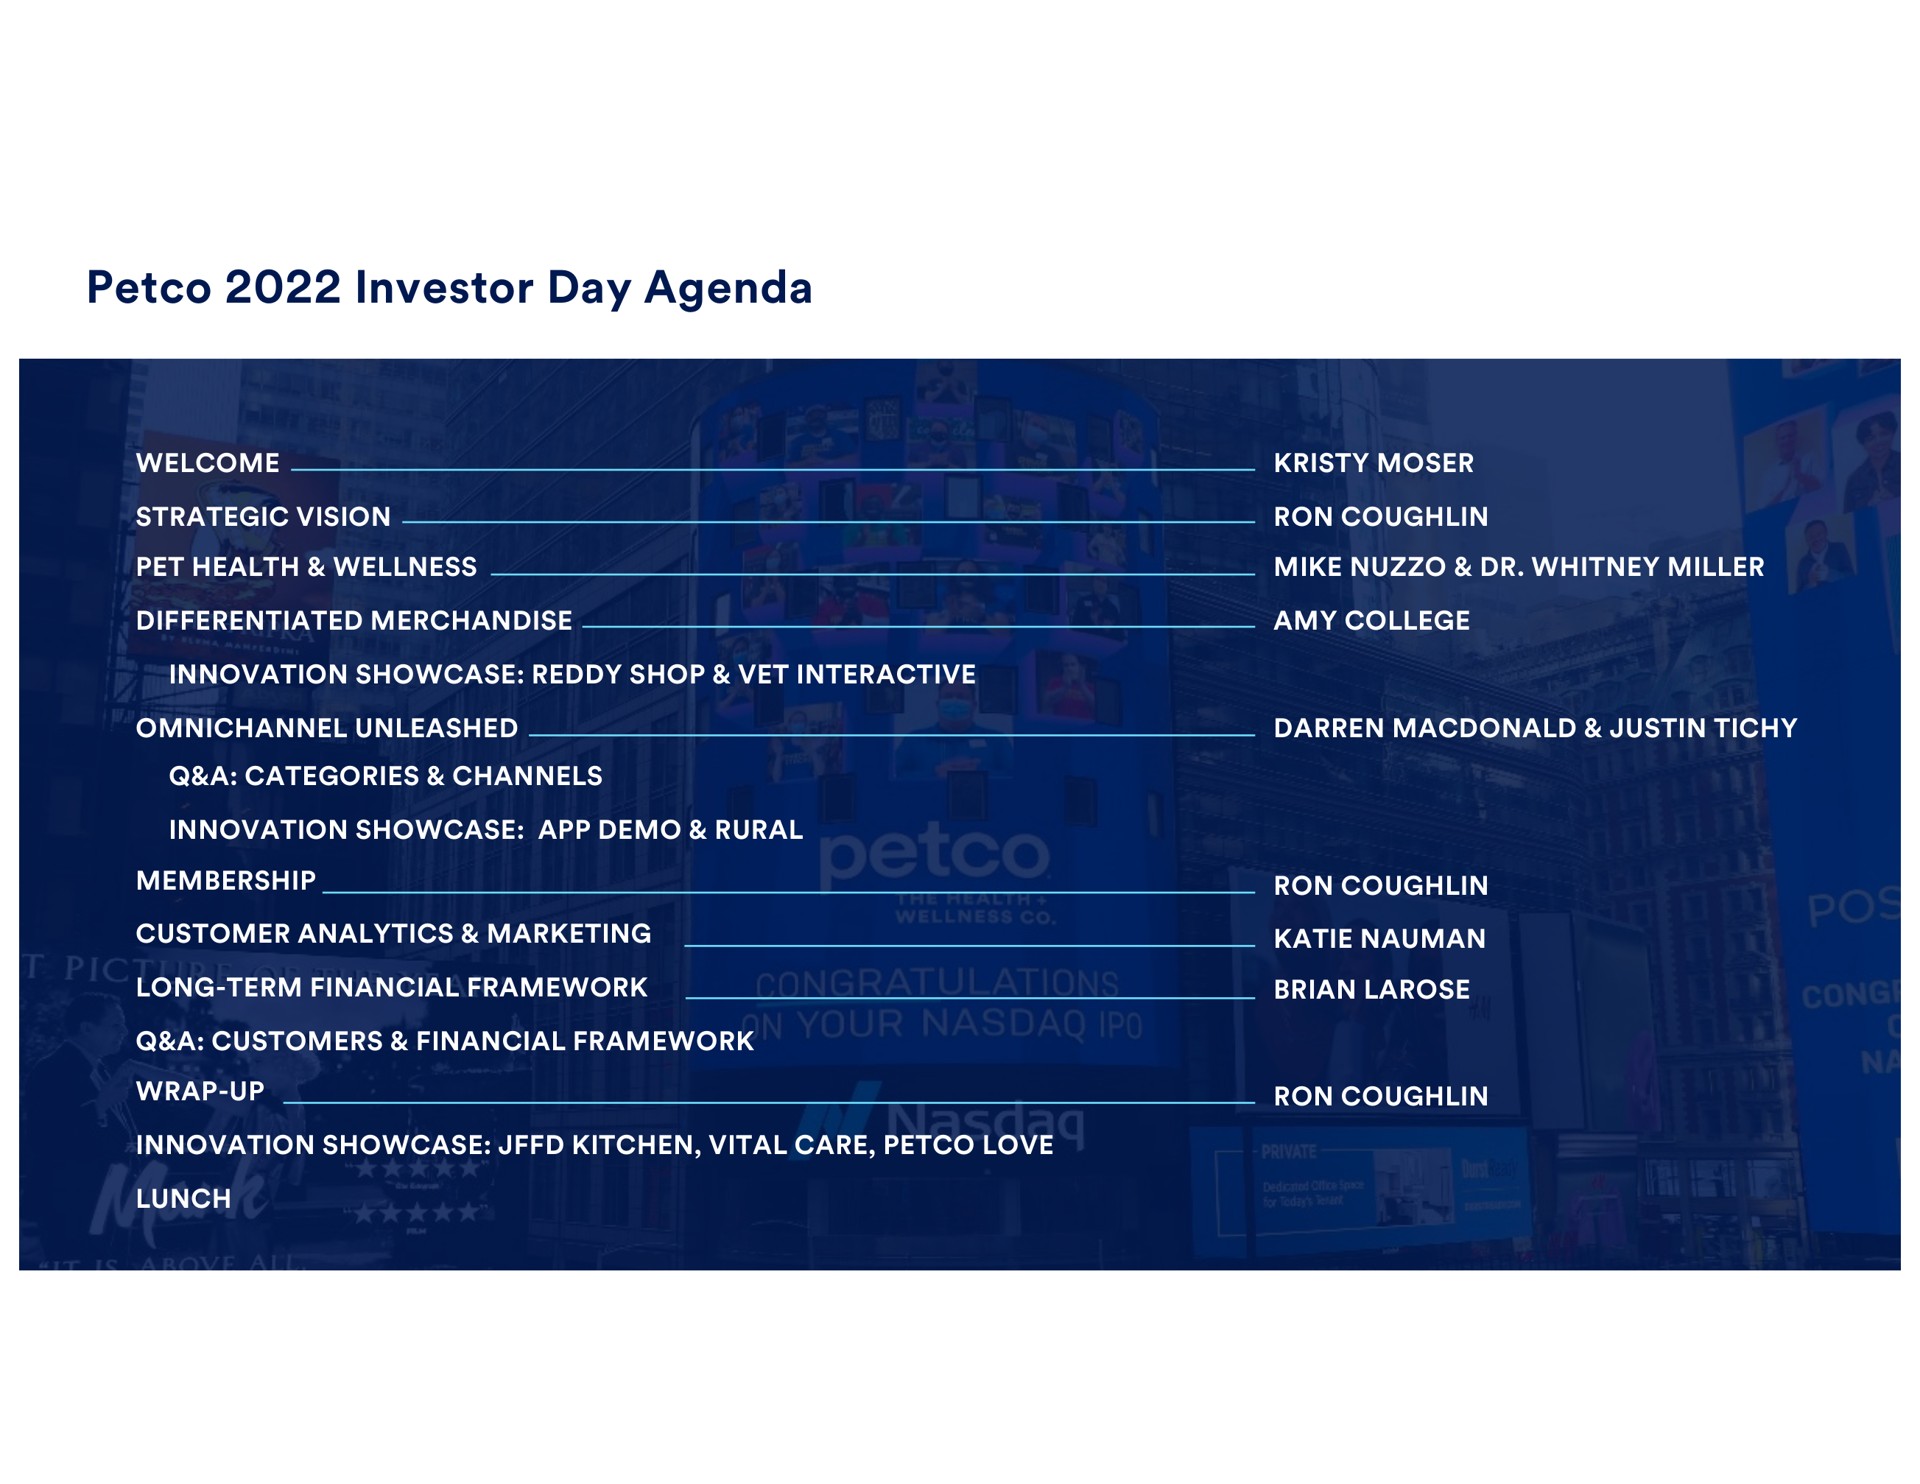 investor day agenda i a an strategic vision pet health wellness mike miller differentiated merchandise amy college innovation showcase reddy shop vet interactive unleashed wrap up wid tae a categories channels long term financial framework customer analytics marketing a customers financial framework innovation showcase rural lunch innovation showcase kitchen vital care love | Petco